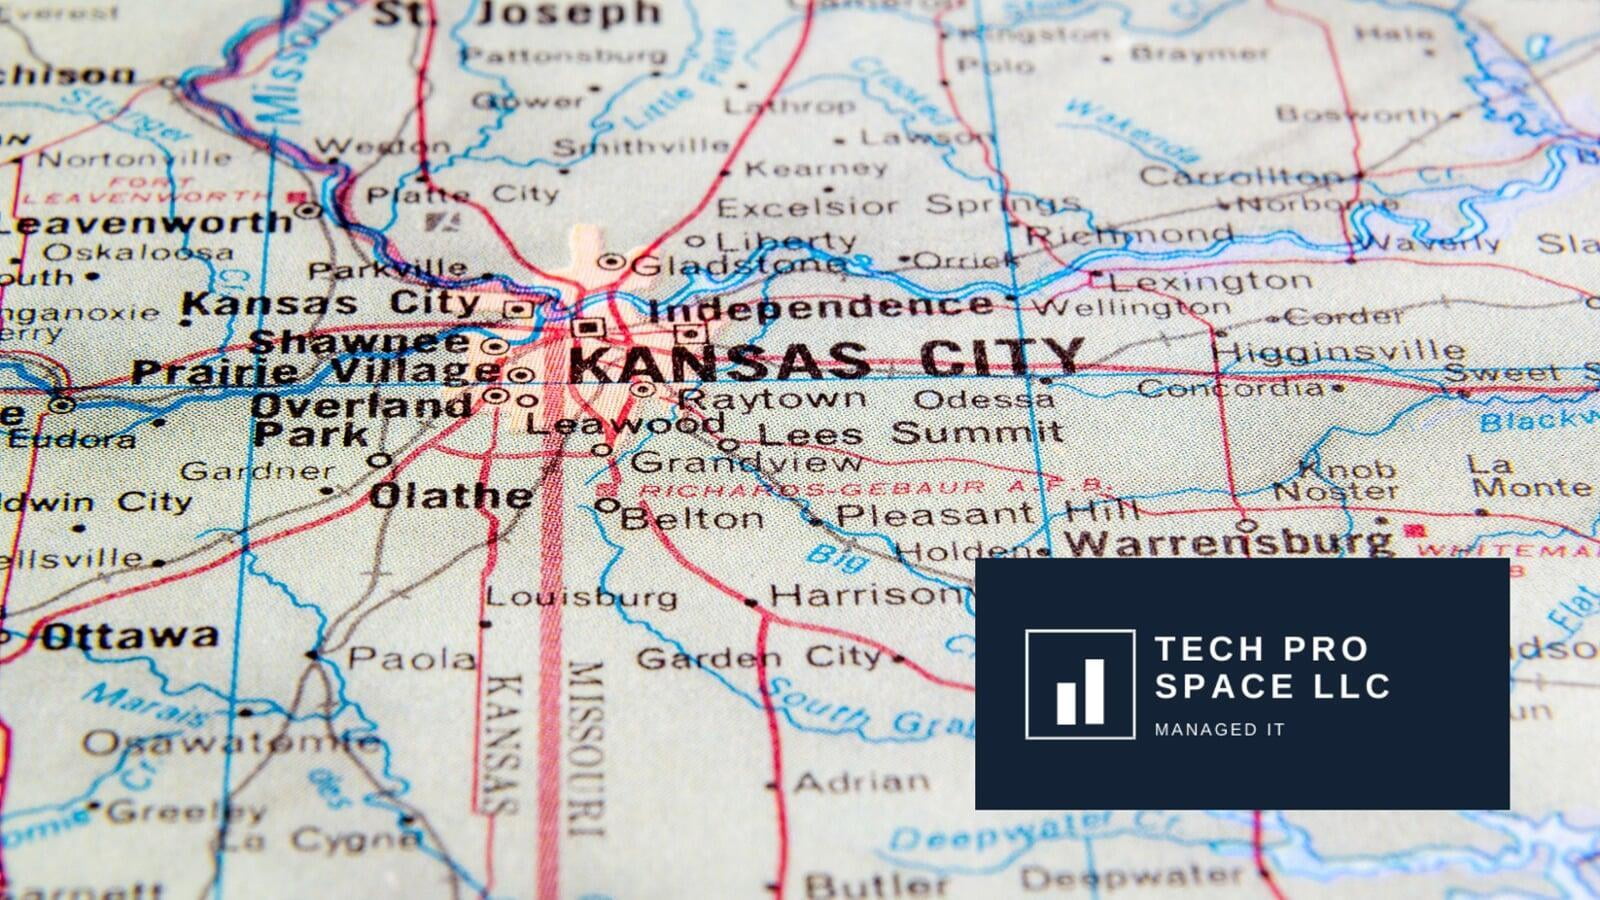 The Top Cybersecurity Threats Facing Small and Medium-Sized Businesses in Kansas City and How to Protect Against Them